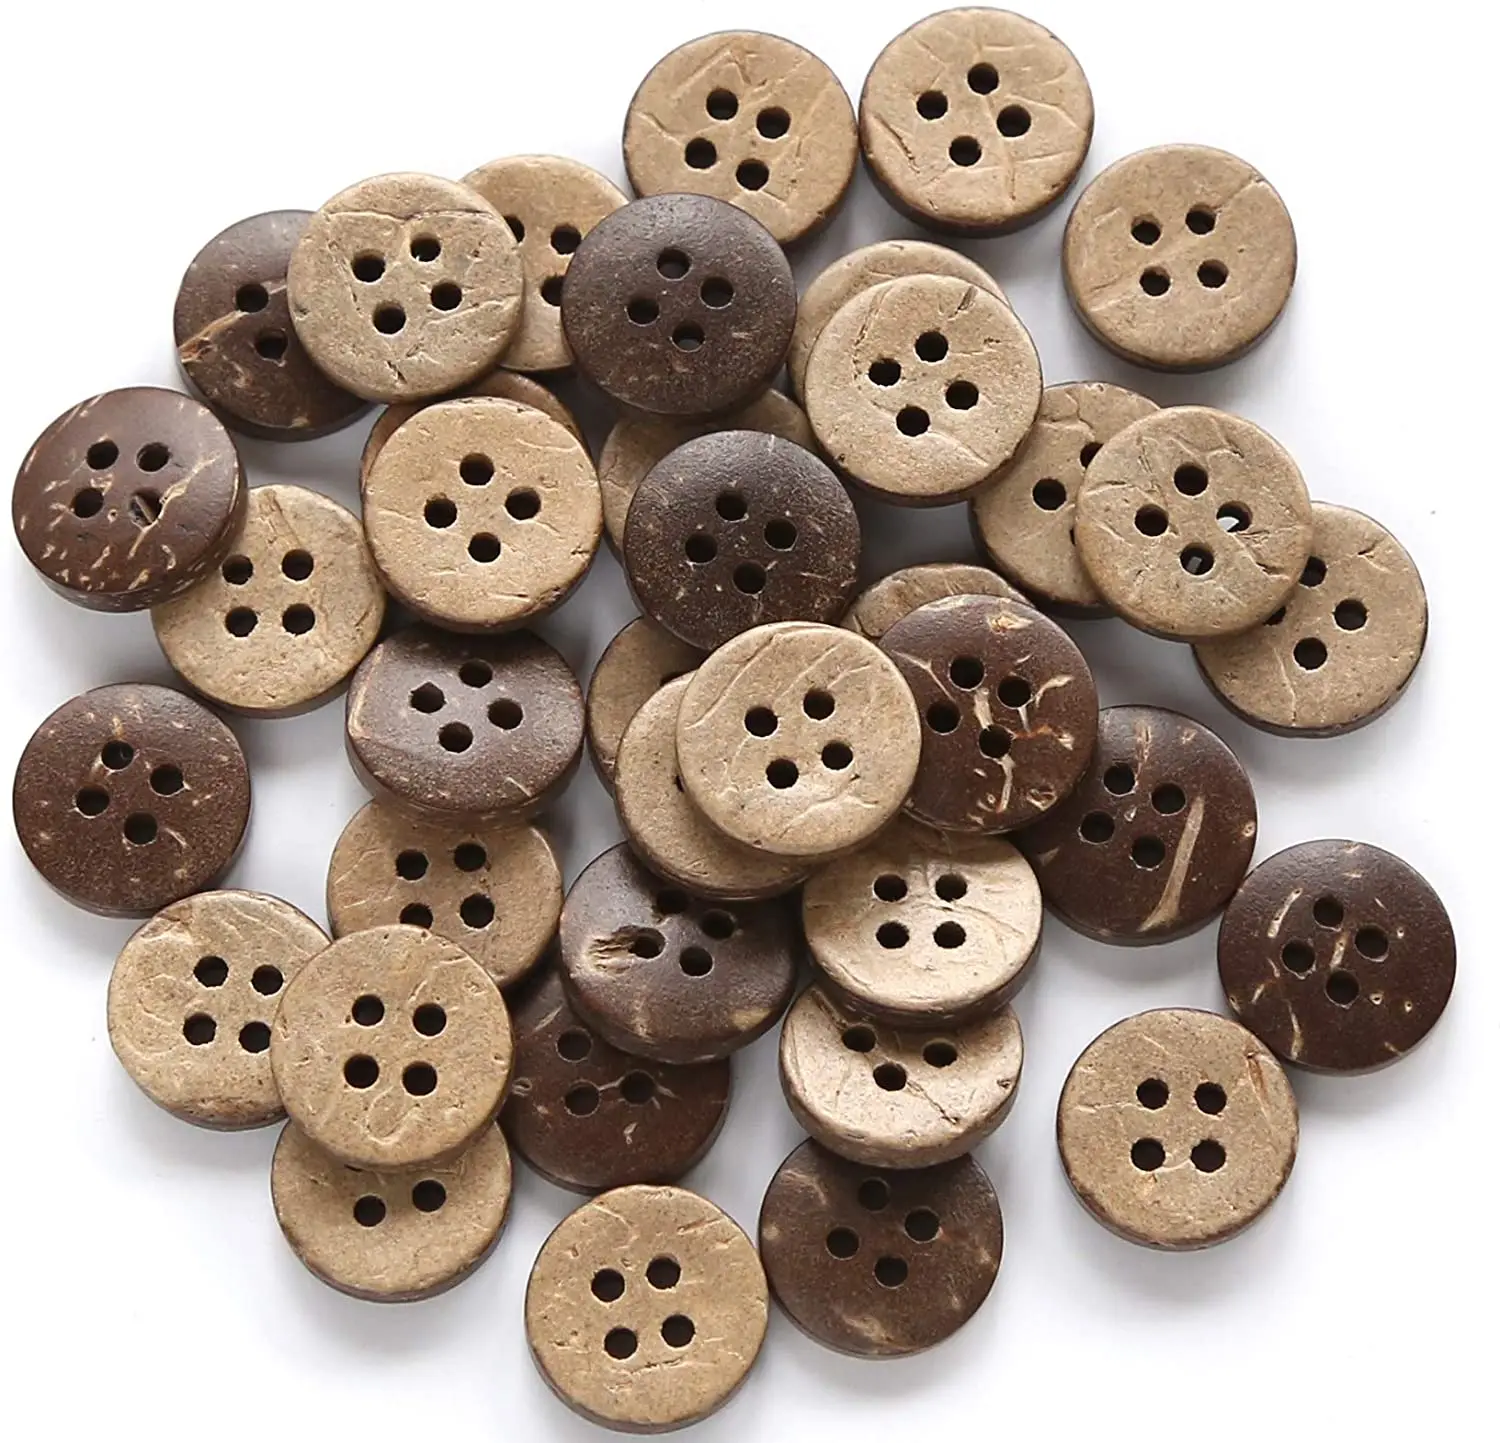 200 Hot Pattern Mixed Coconut Shell 2 Holes Sewing Buttons Scrapbooking 15mm 